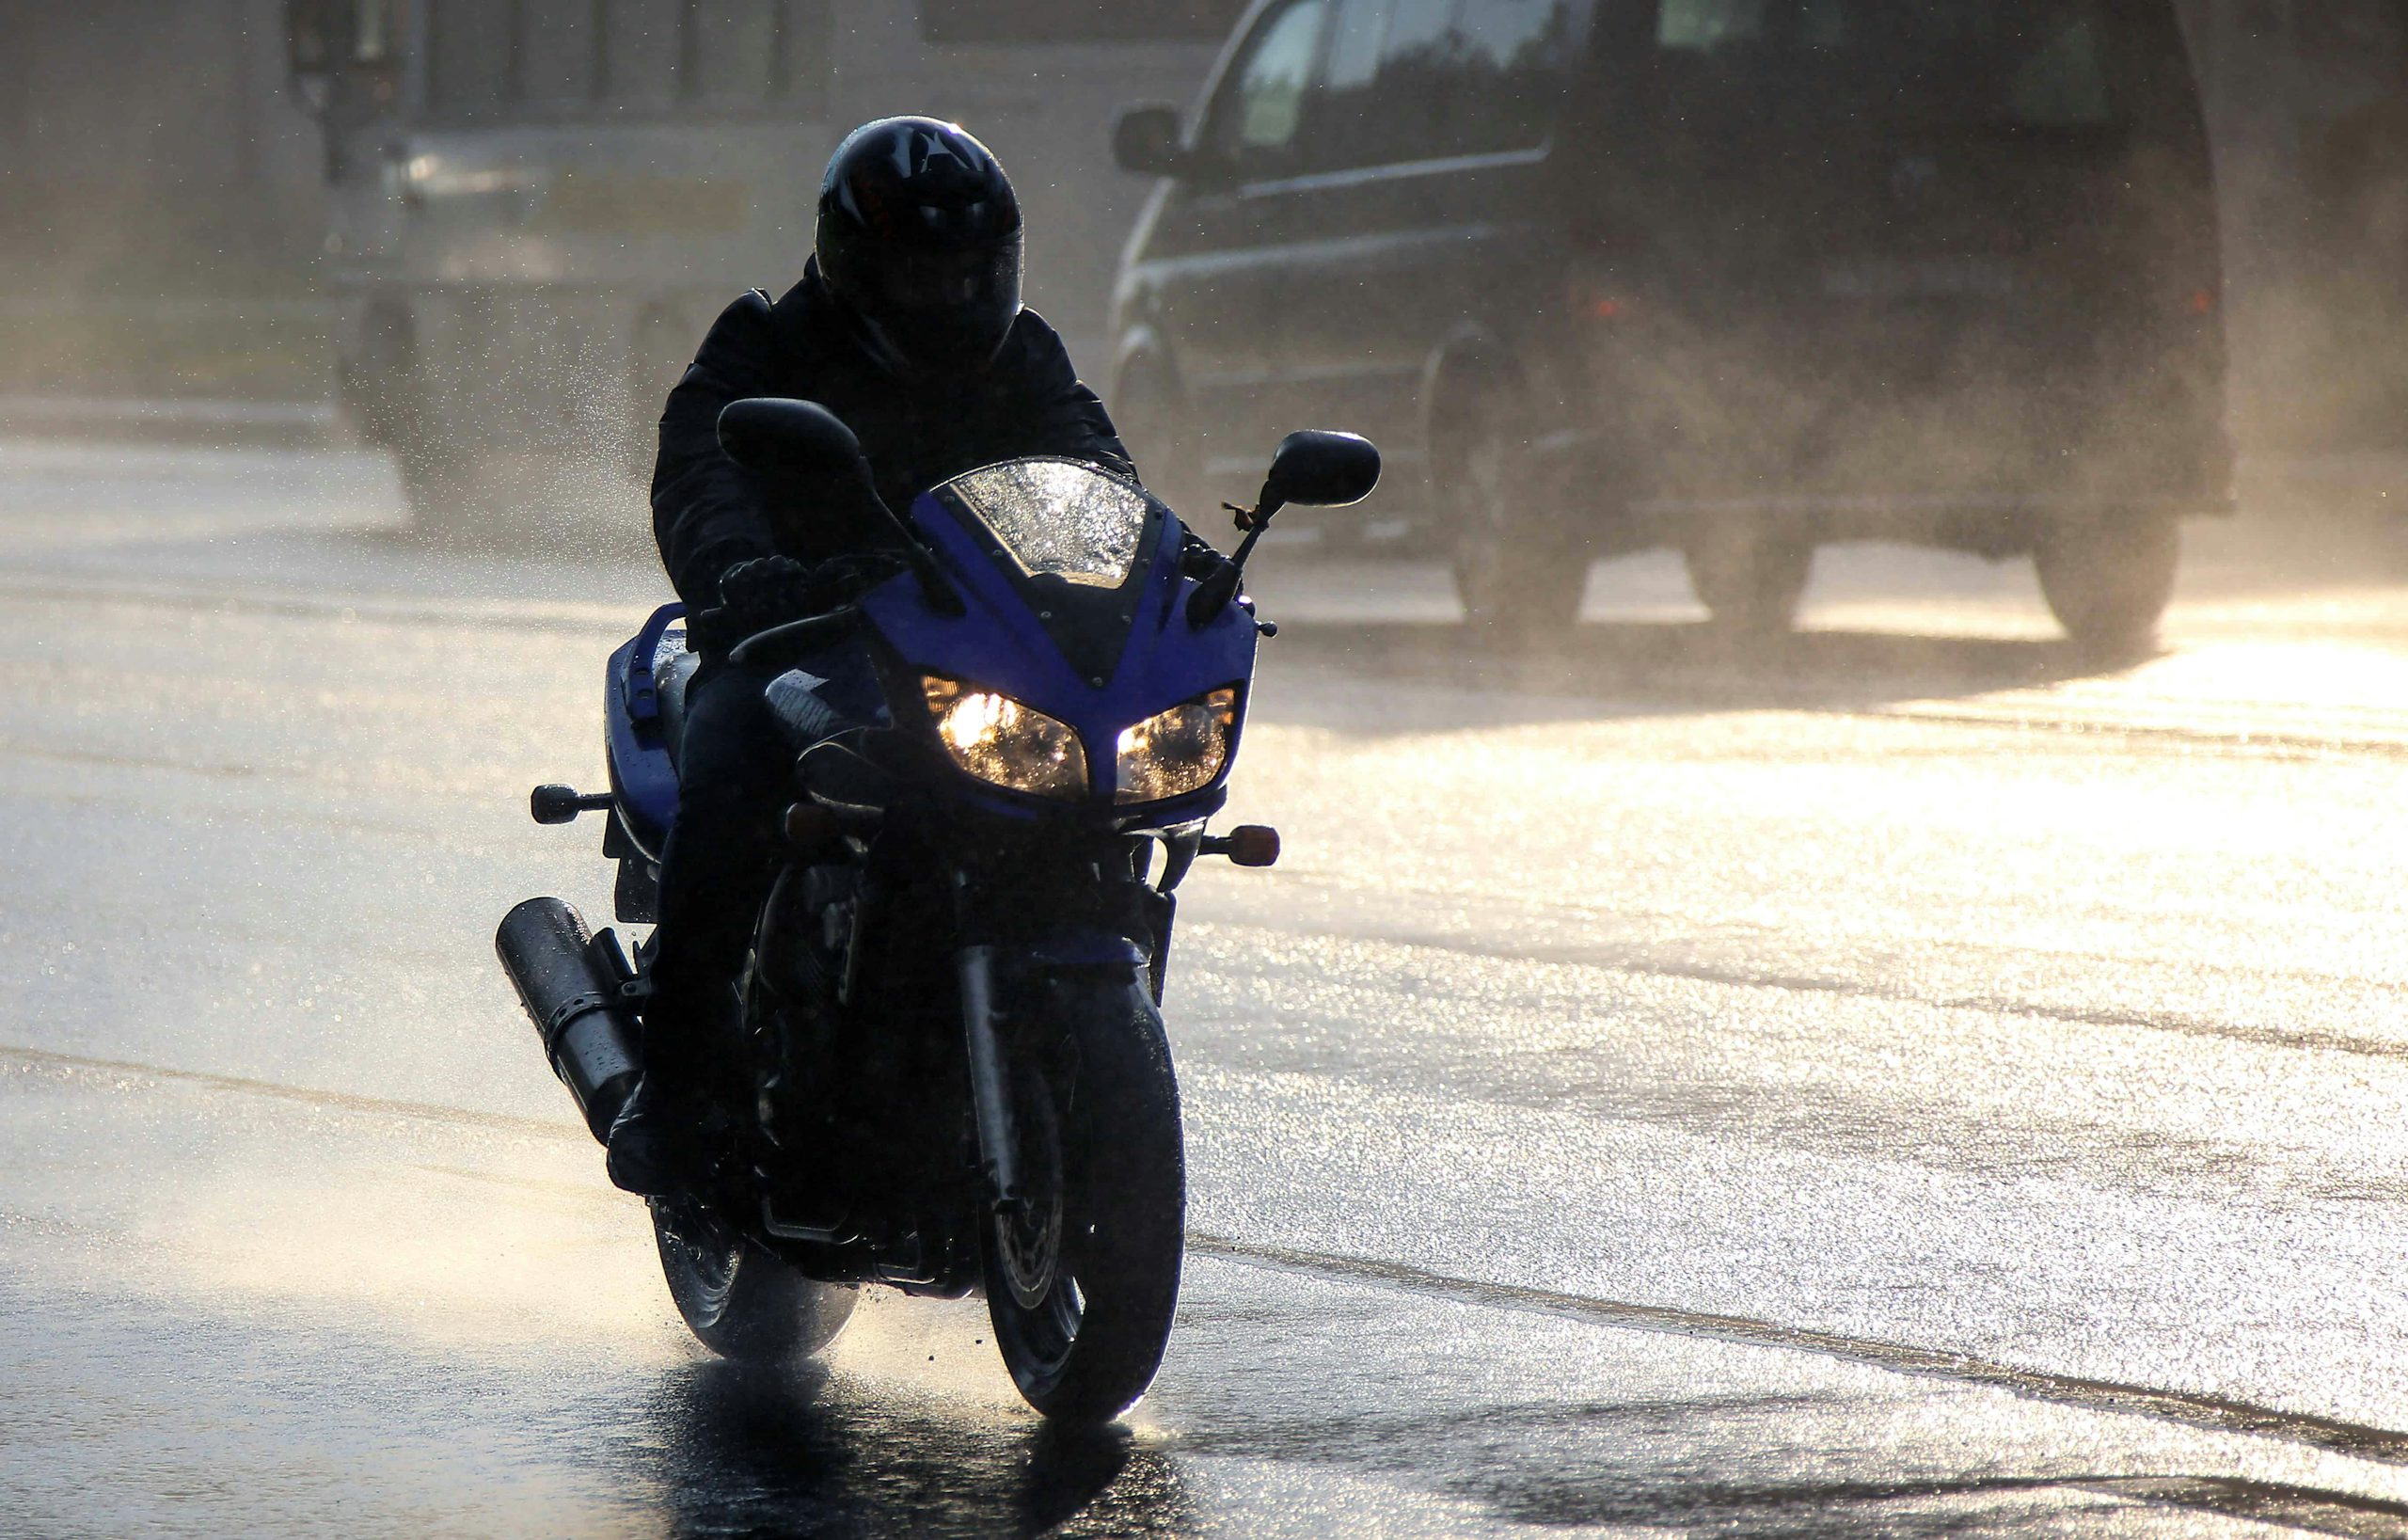 Motorcyclist riding in bad weather